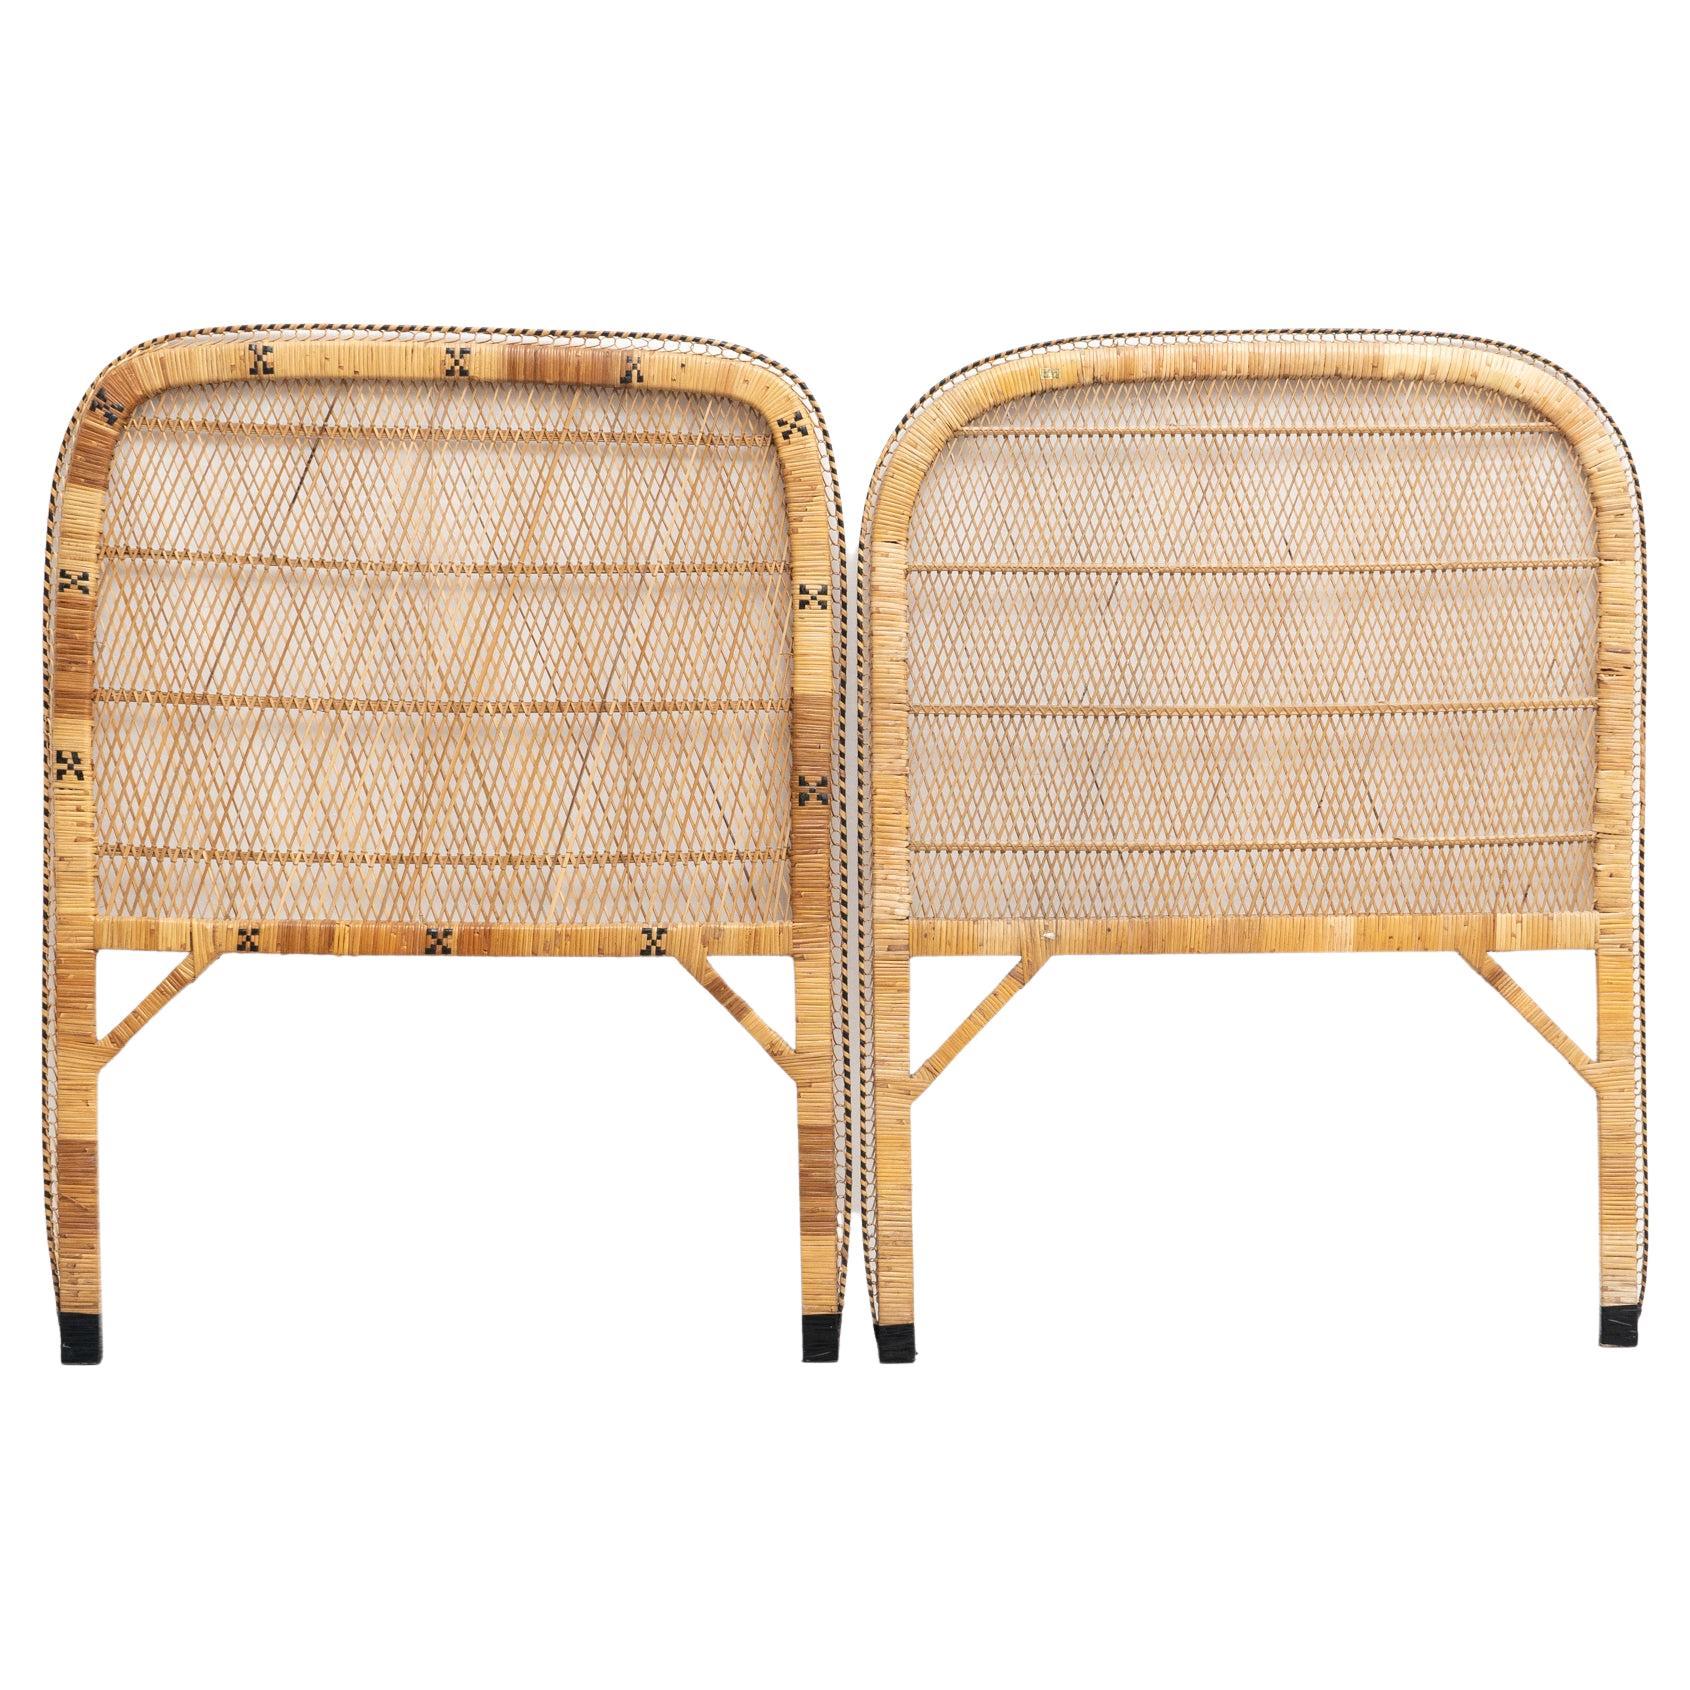 Pair of Bamboo and Rattan Headboard Handcrafted Philippines, 1960